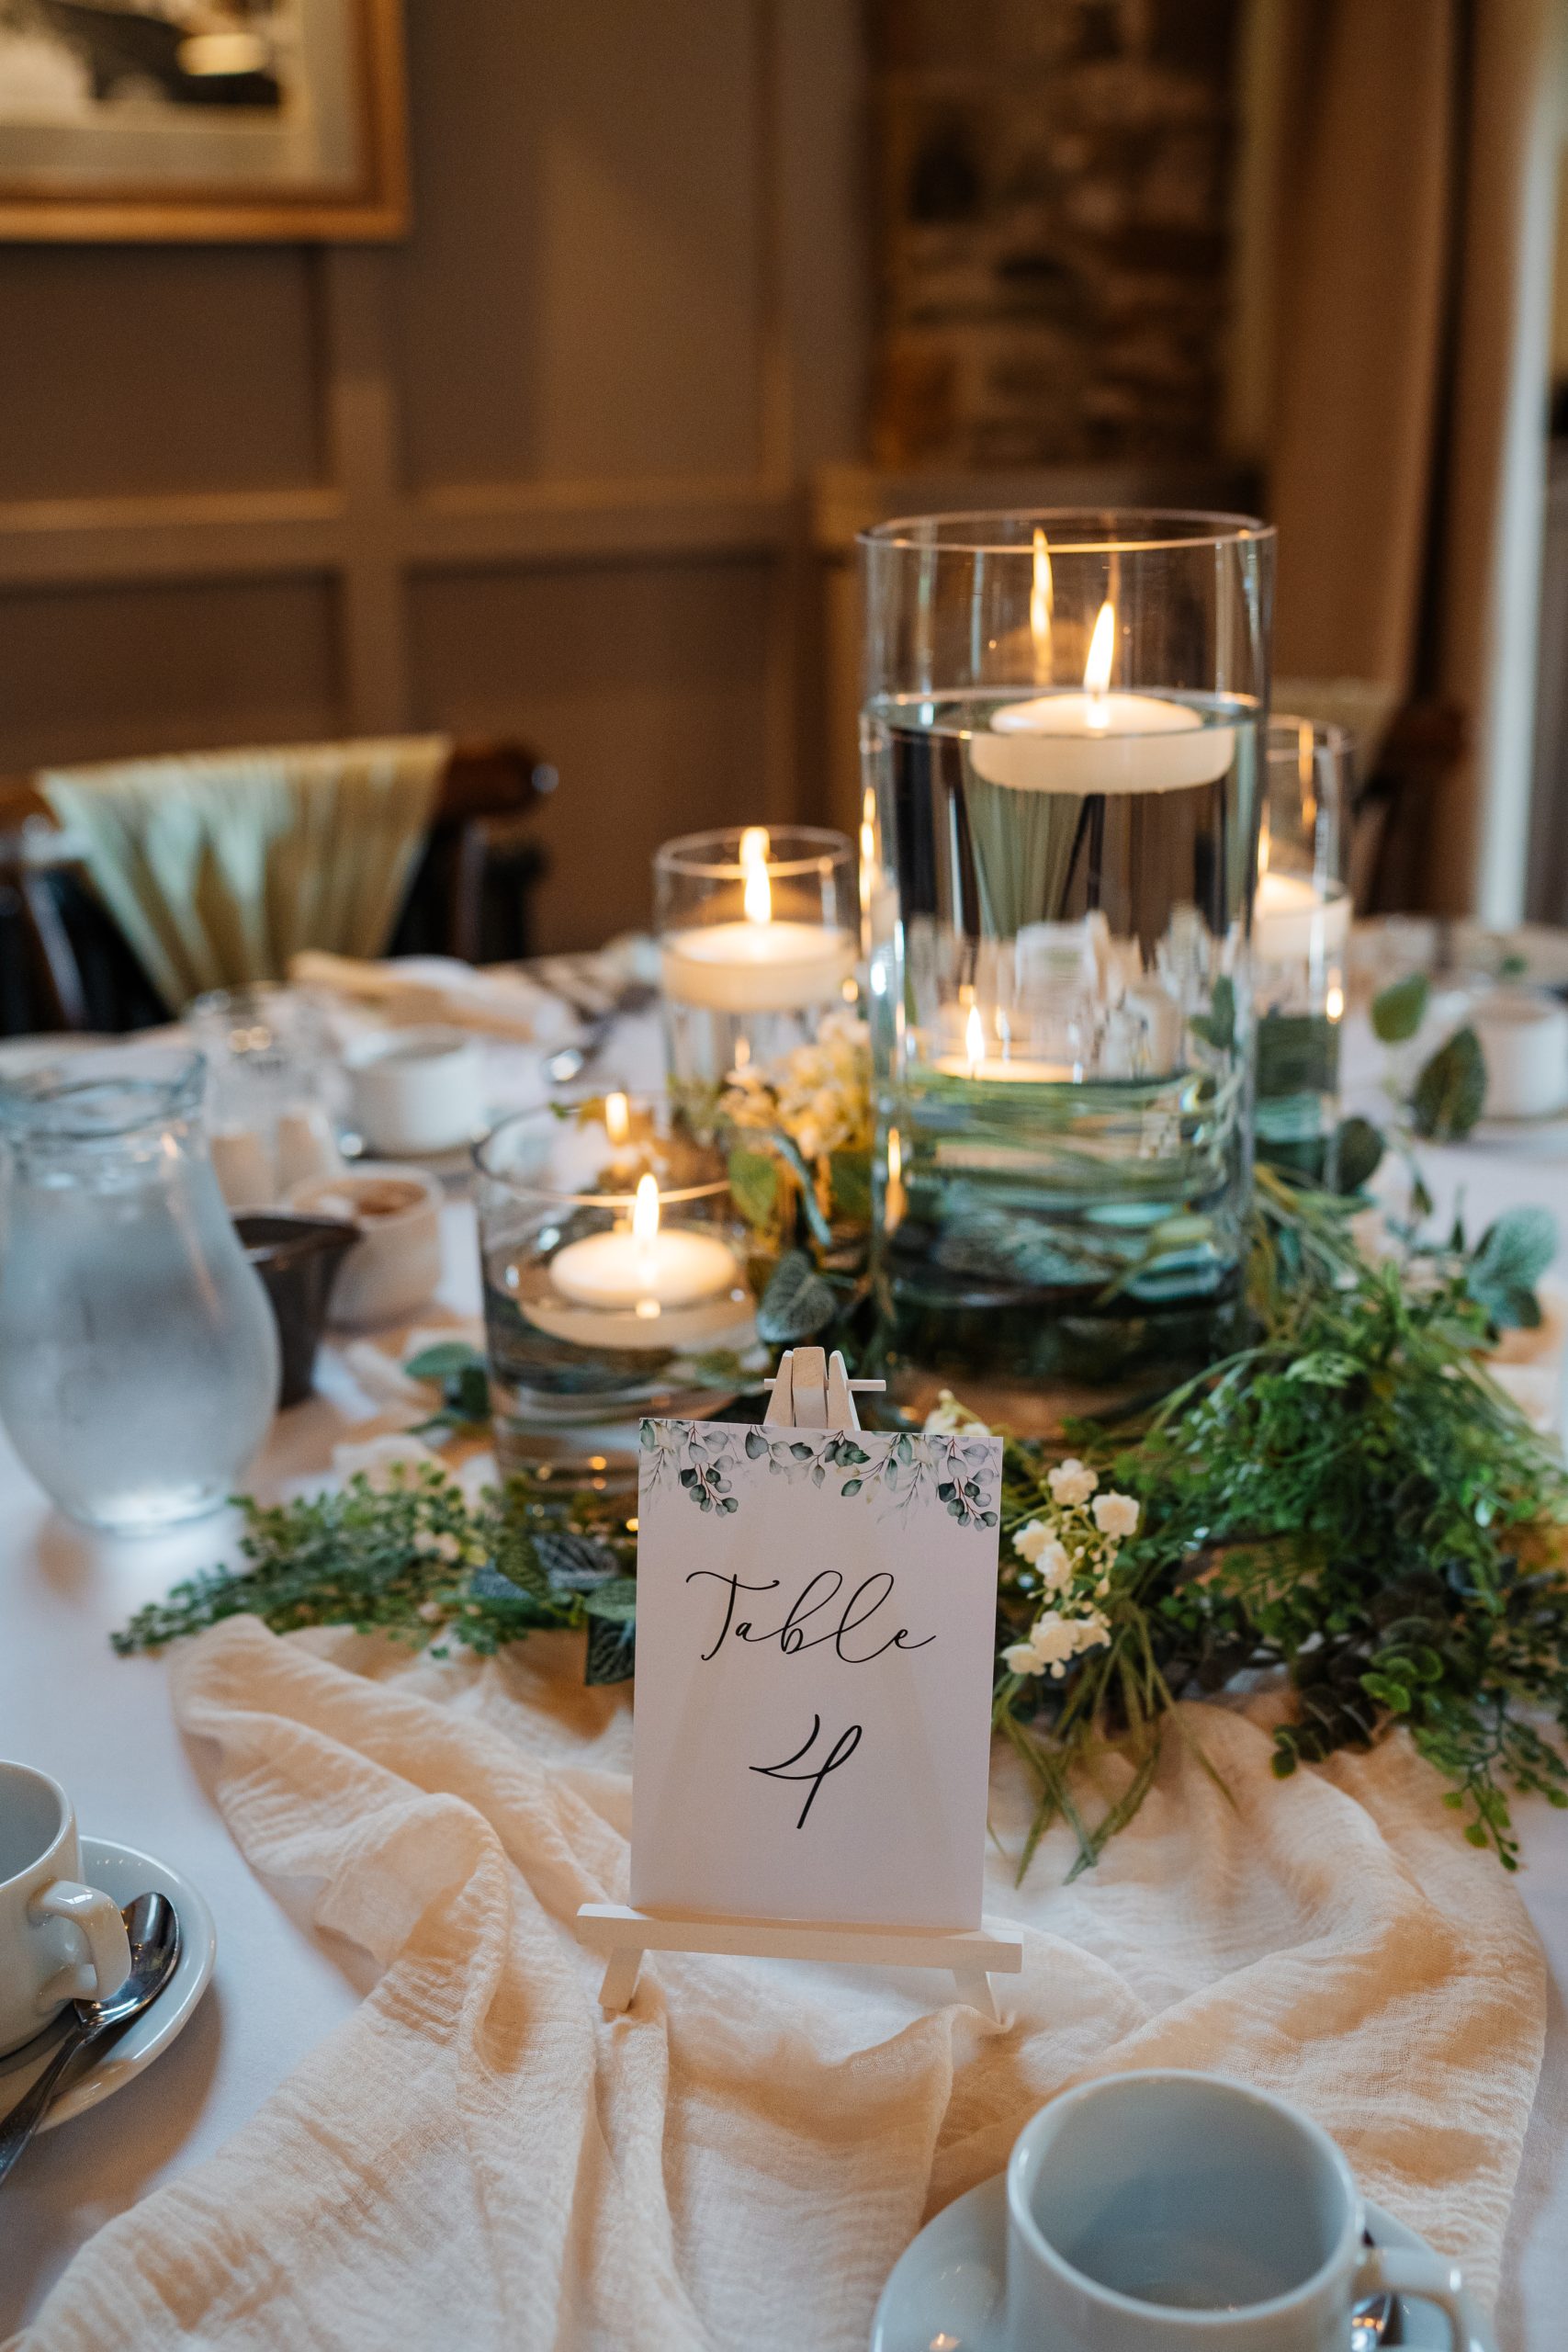 Wedding Table at Tempest Arms